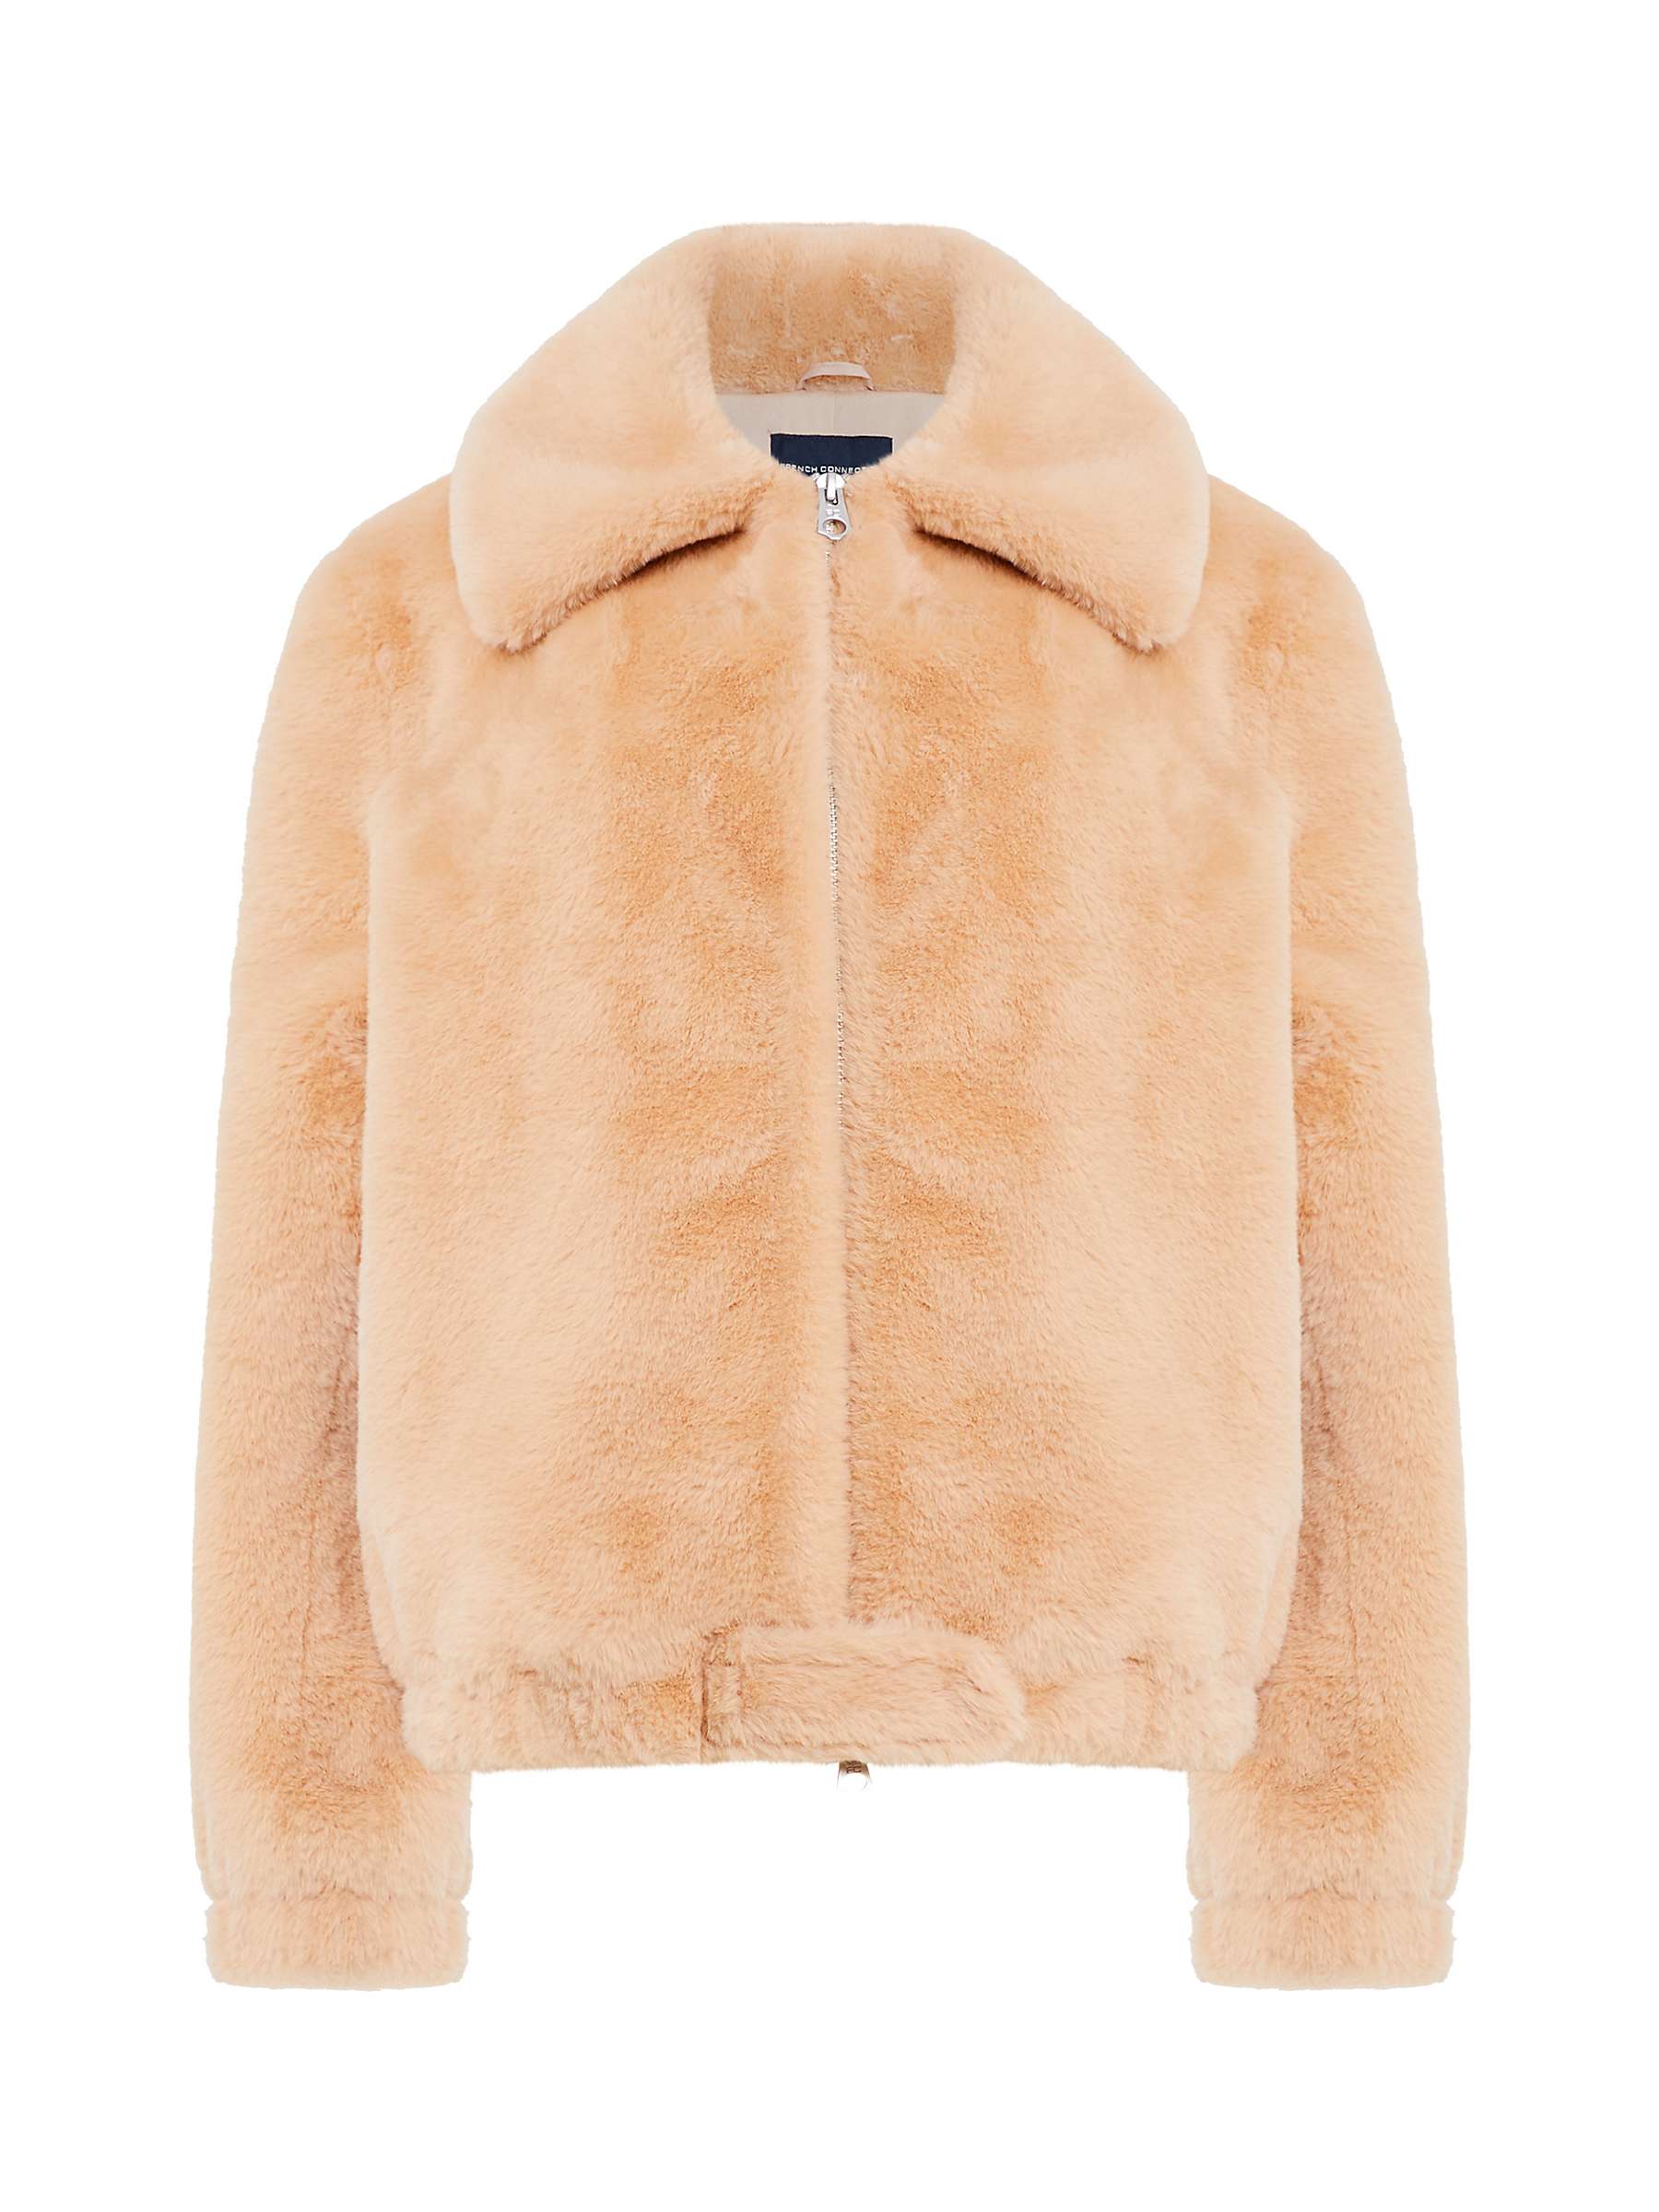 Buy French Connection Avi Iren Faux Fur Jacket, Mid Brown Online at johnlewis.com